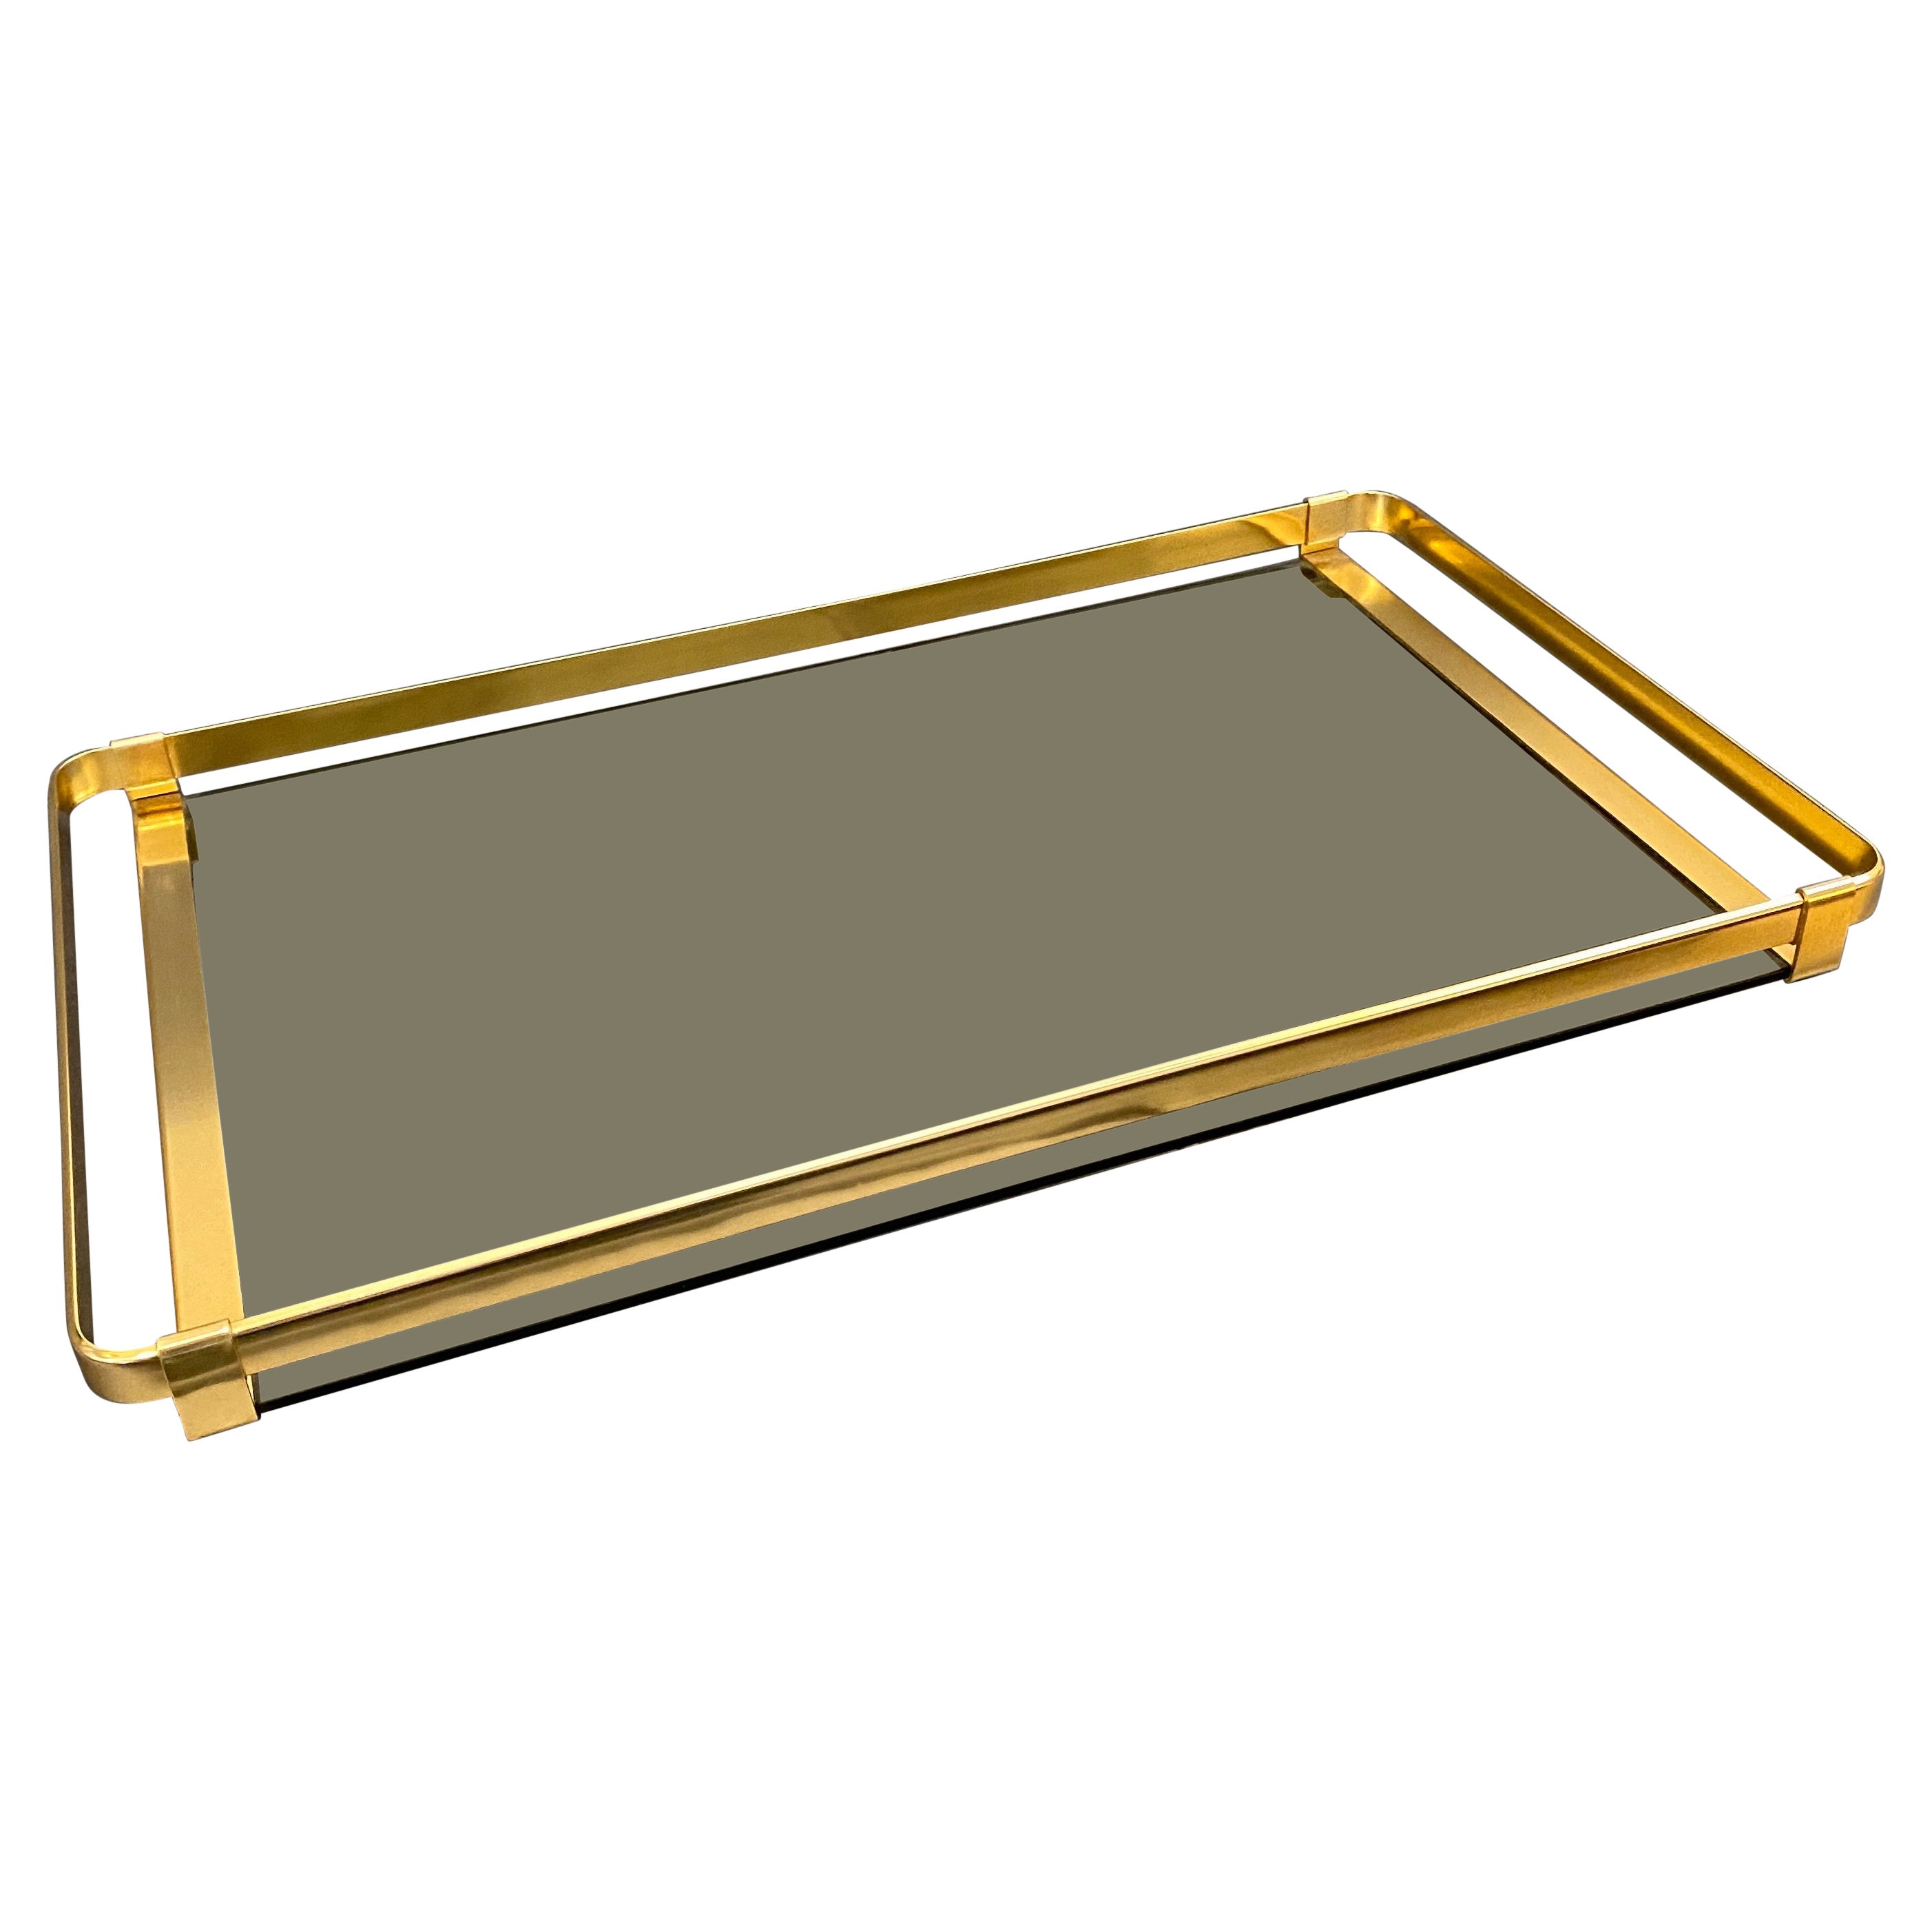 1970s Mid-Century Modern Brass and Smoked Glass Italian Tray by MB